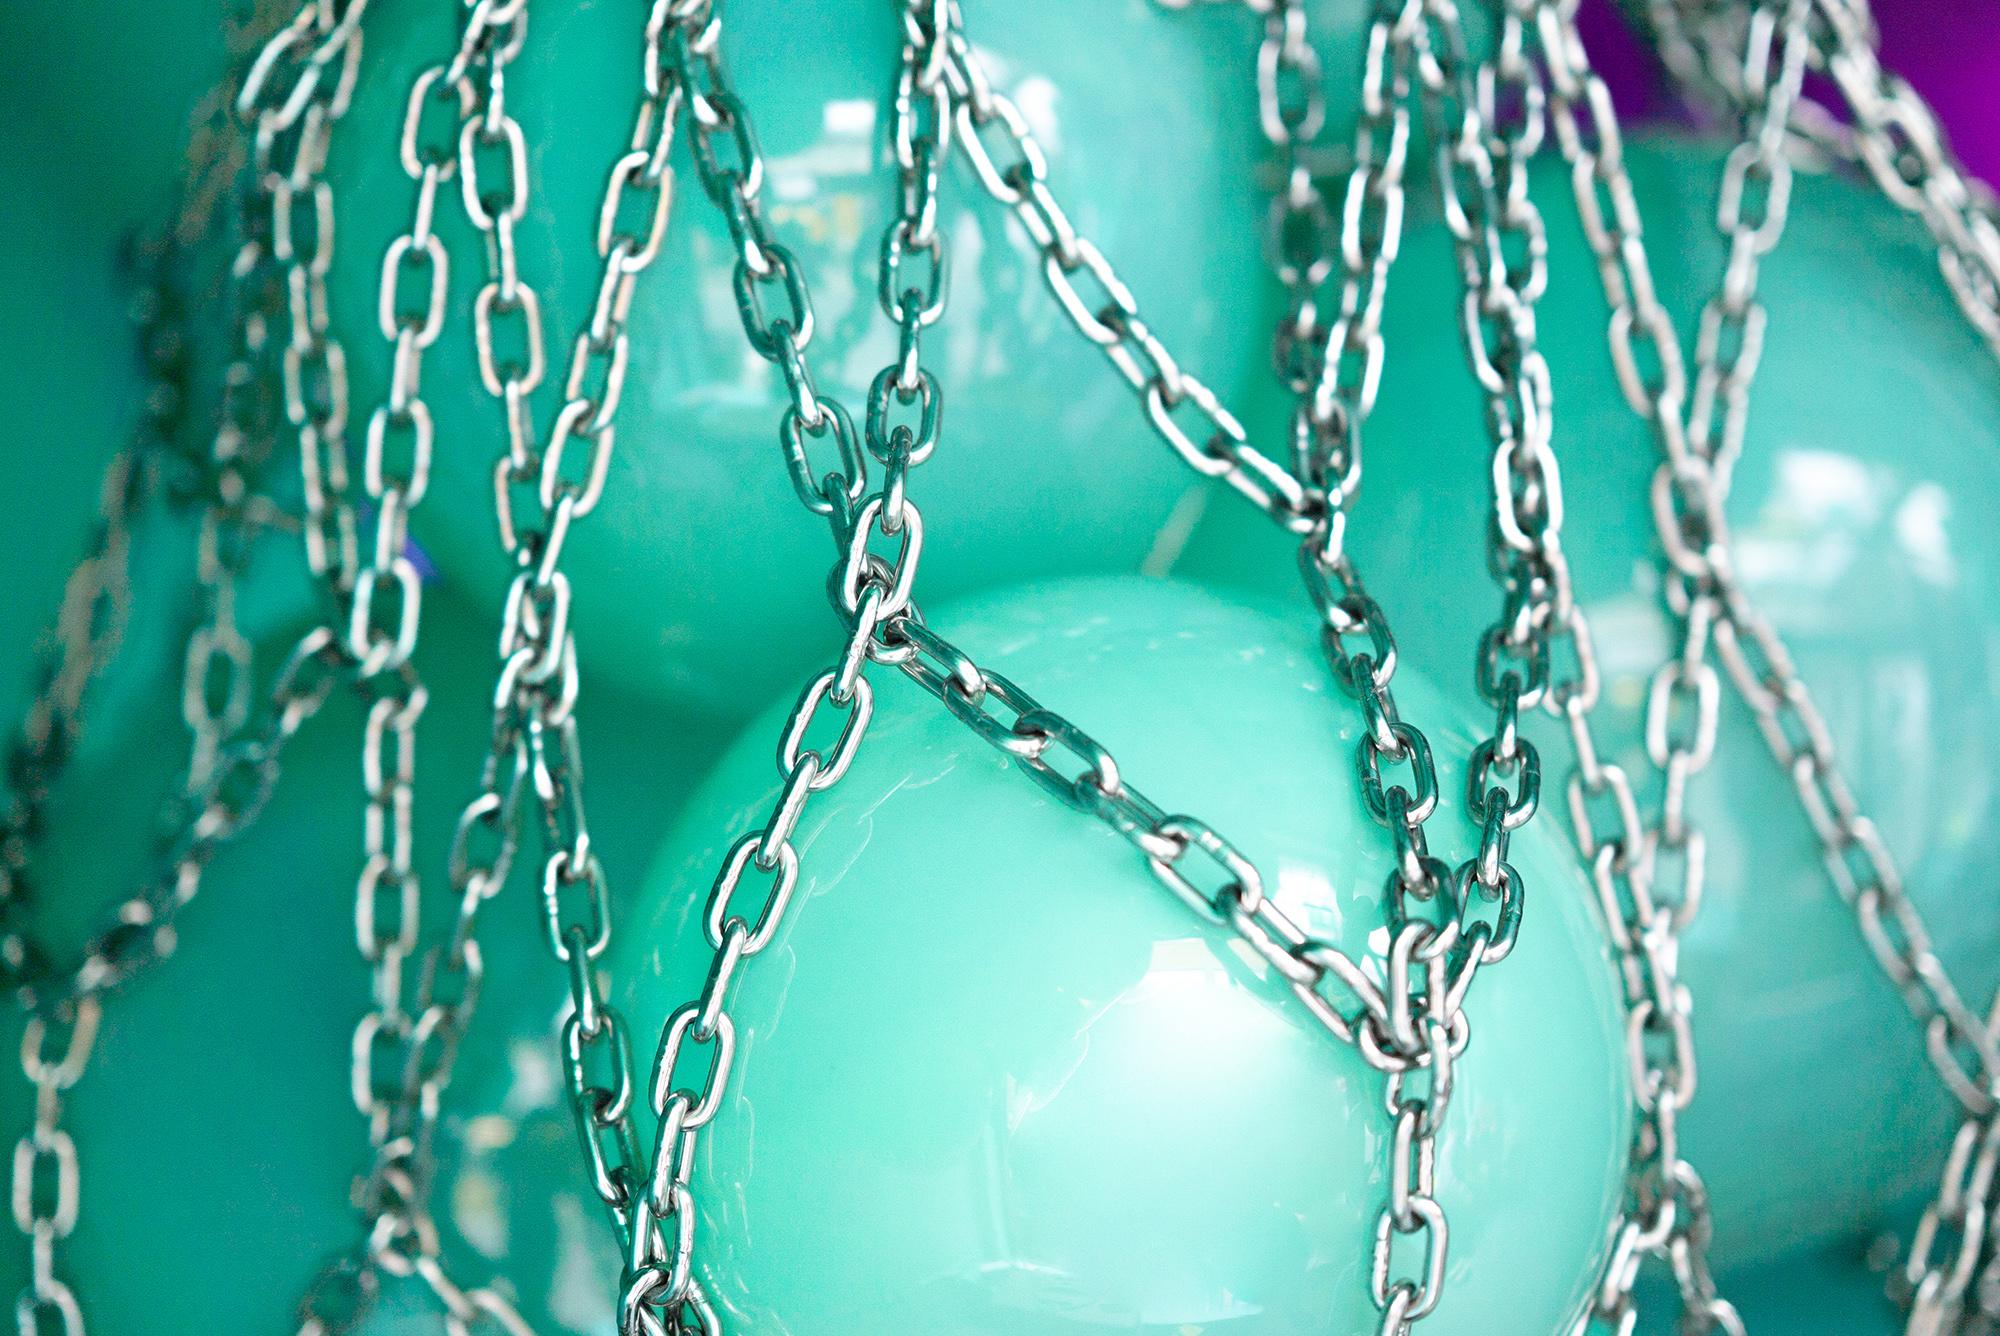 Helmi hand blown glass and silver net contemporary chandelier, made up of 8 hand blown glass green peals in a steel net.

The Helmi, meaning ‘pearl’ in the mother tongue of designer Ian Cameron, was conceived during a fishing trip near his Finnish